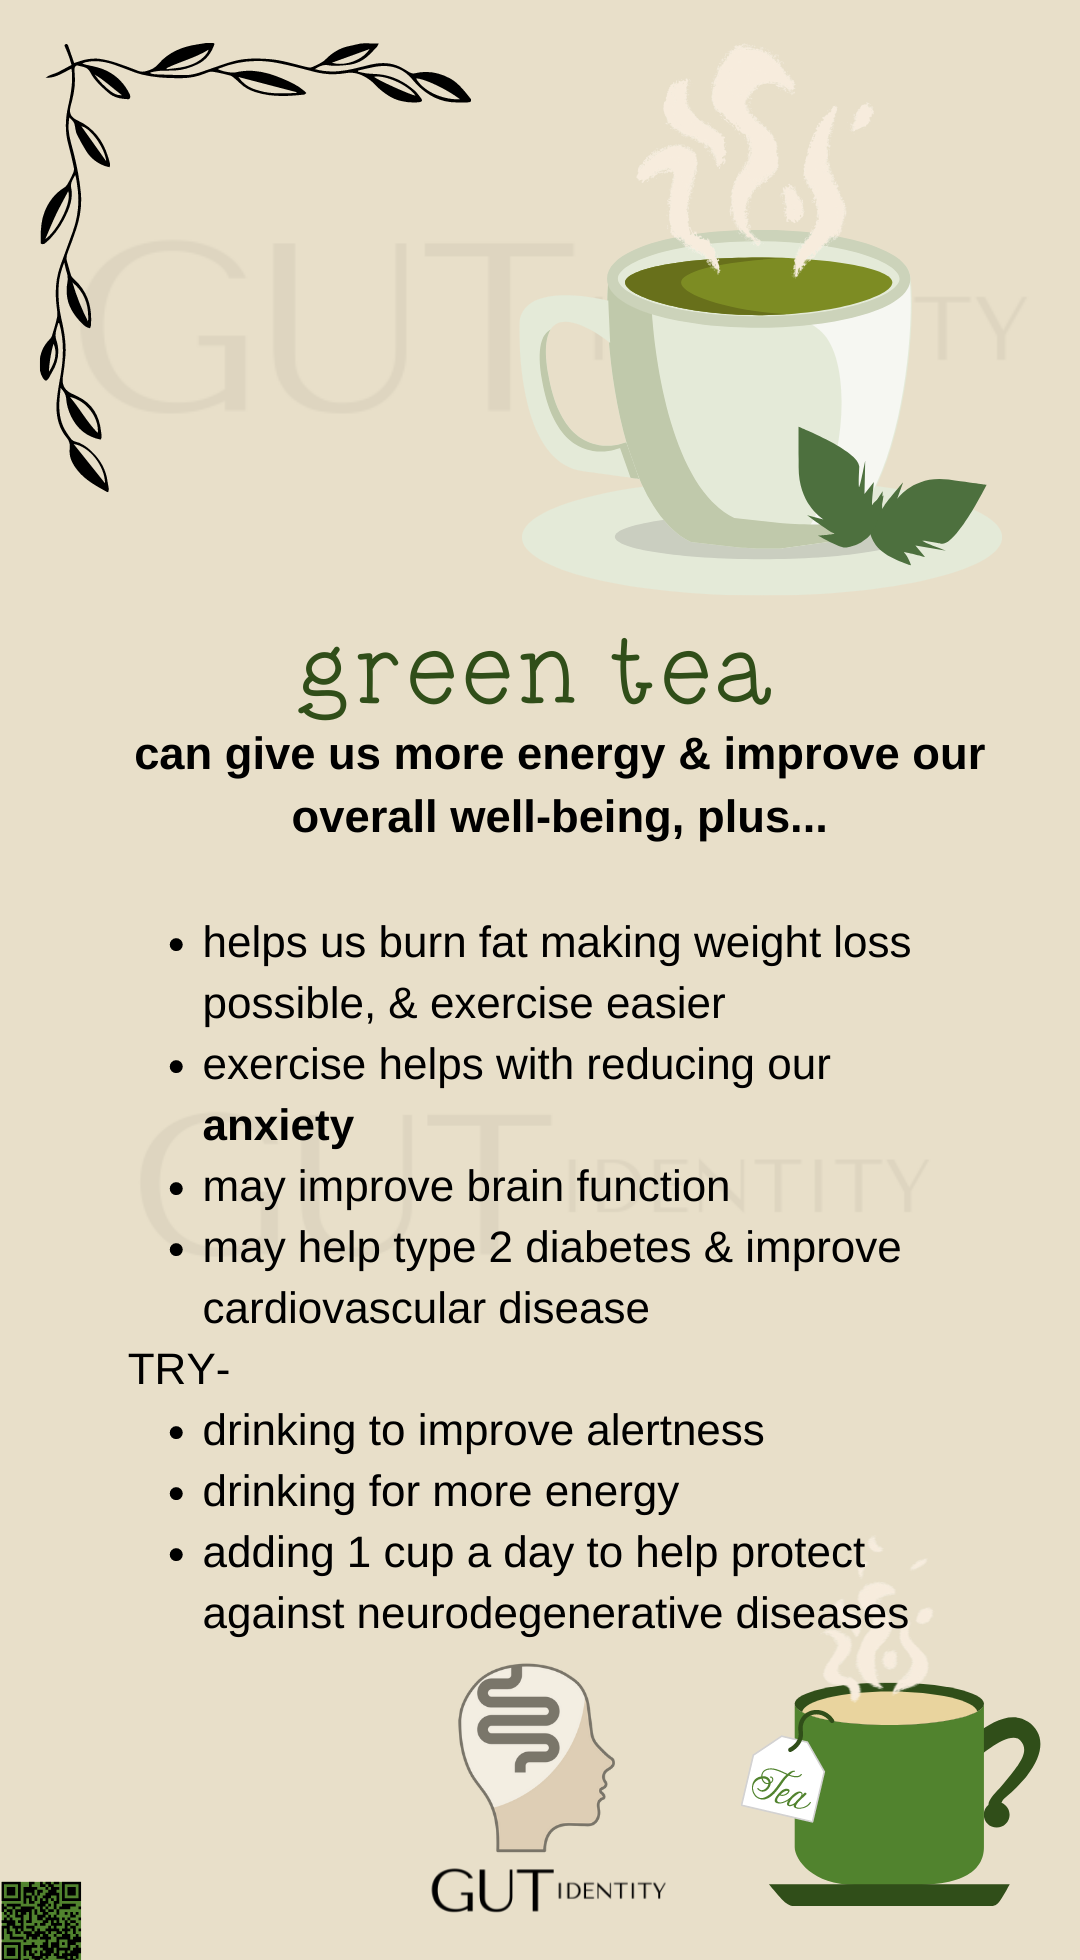 Green tea to improve energy and our overall well-being by Gutidentity